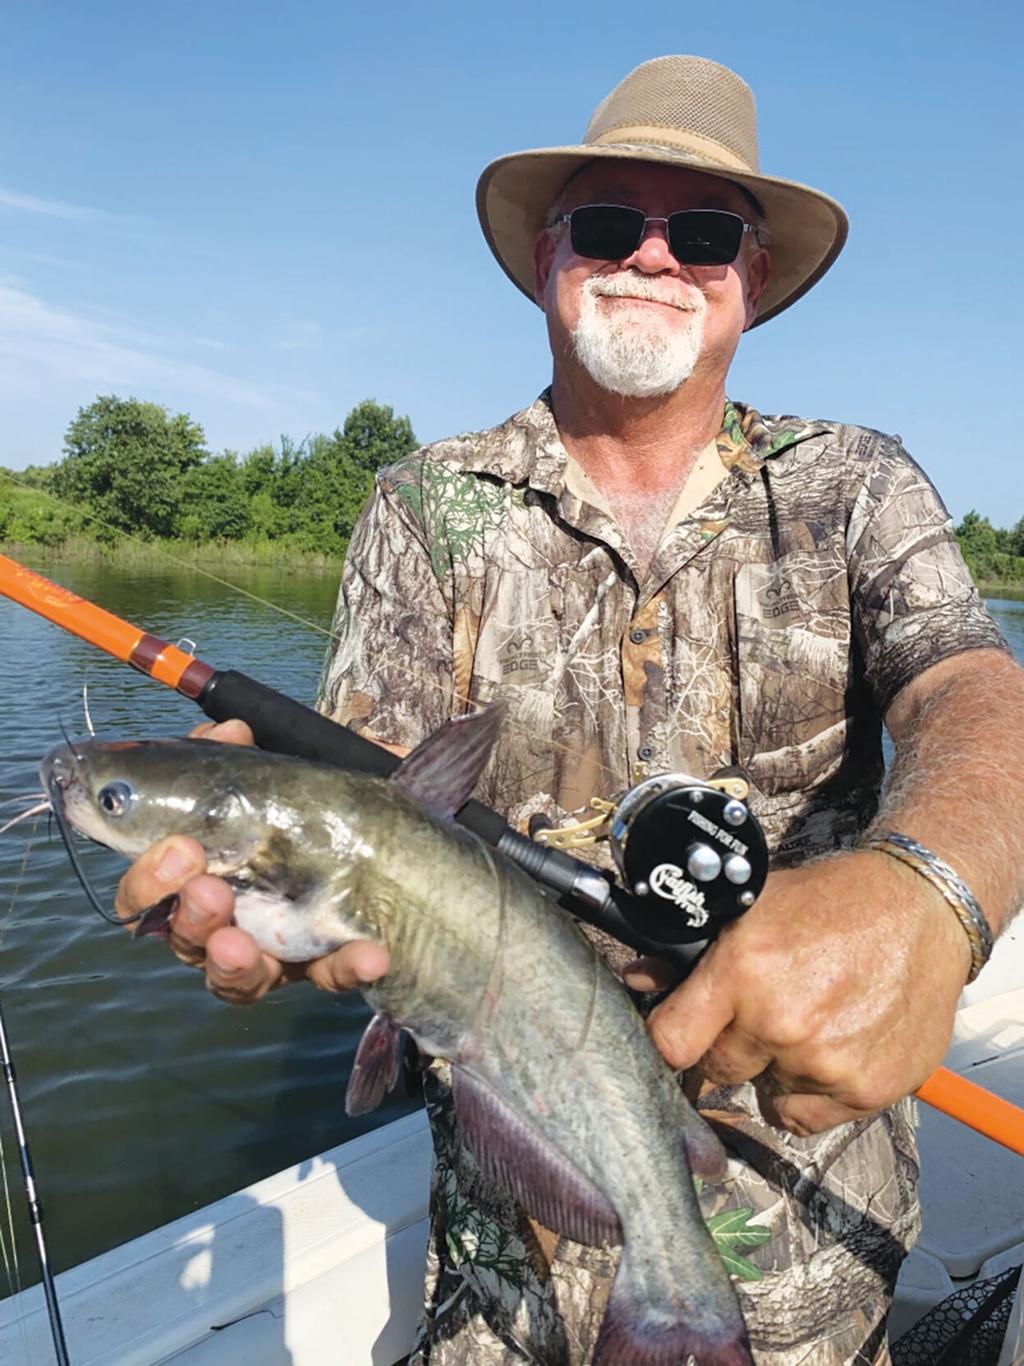 Outdoors with Luke: Luke fishes for catfish with guide David